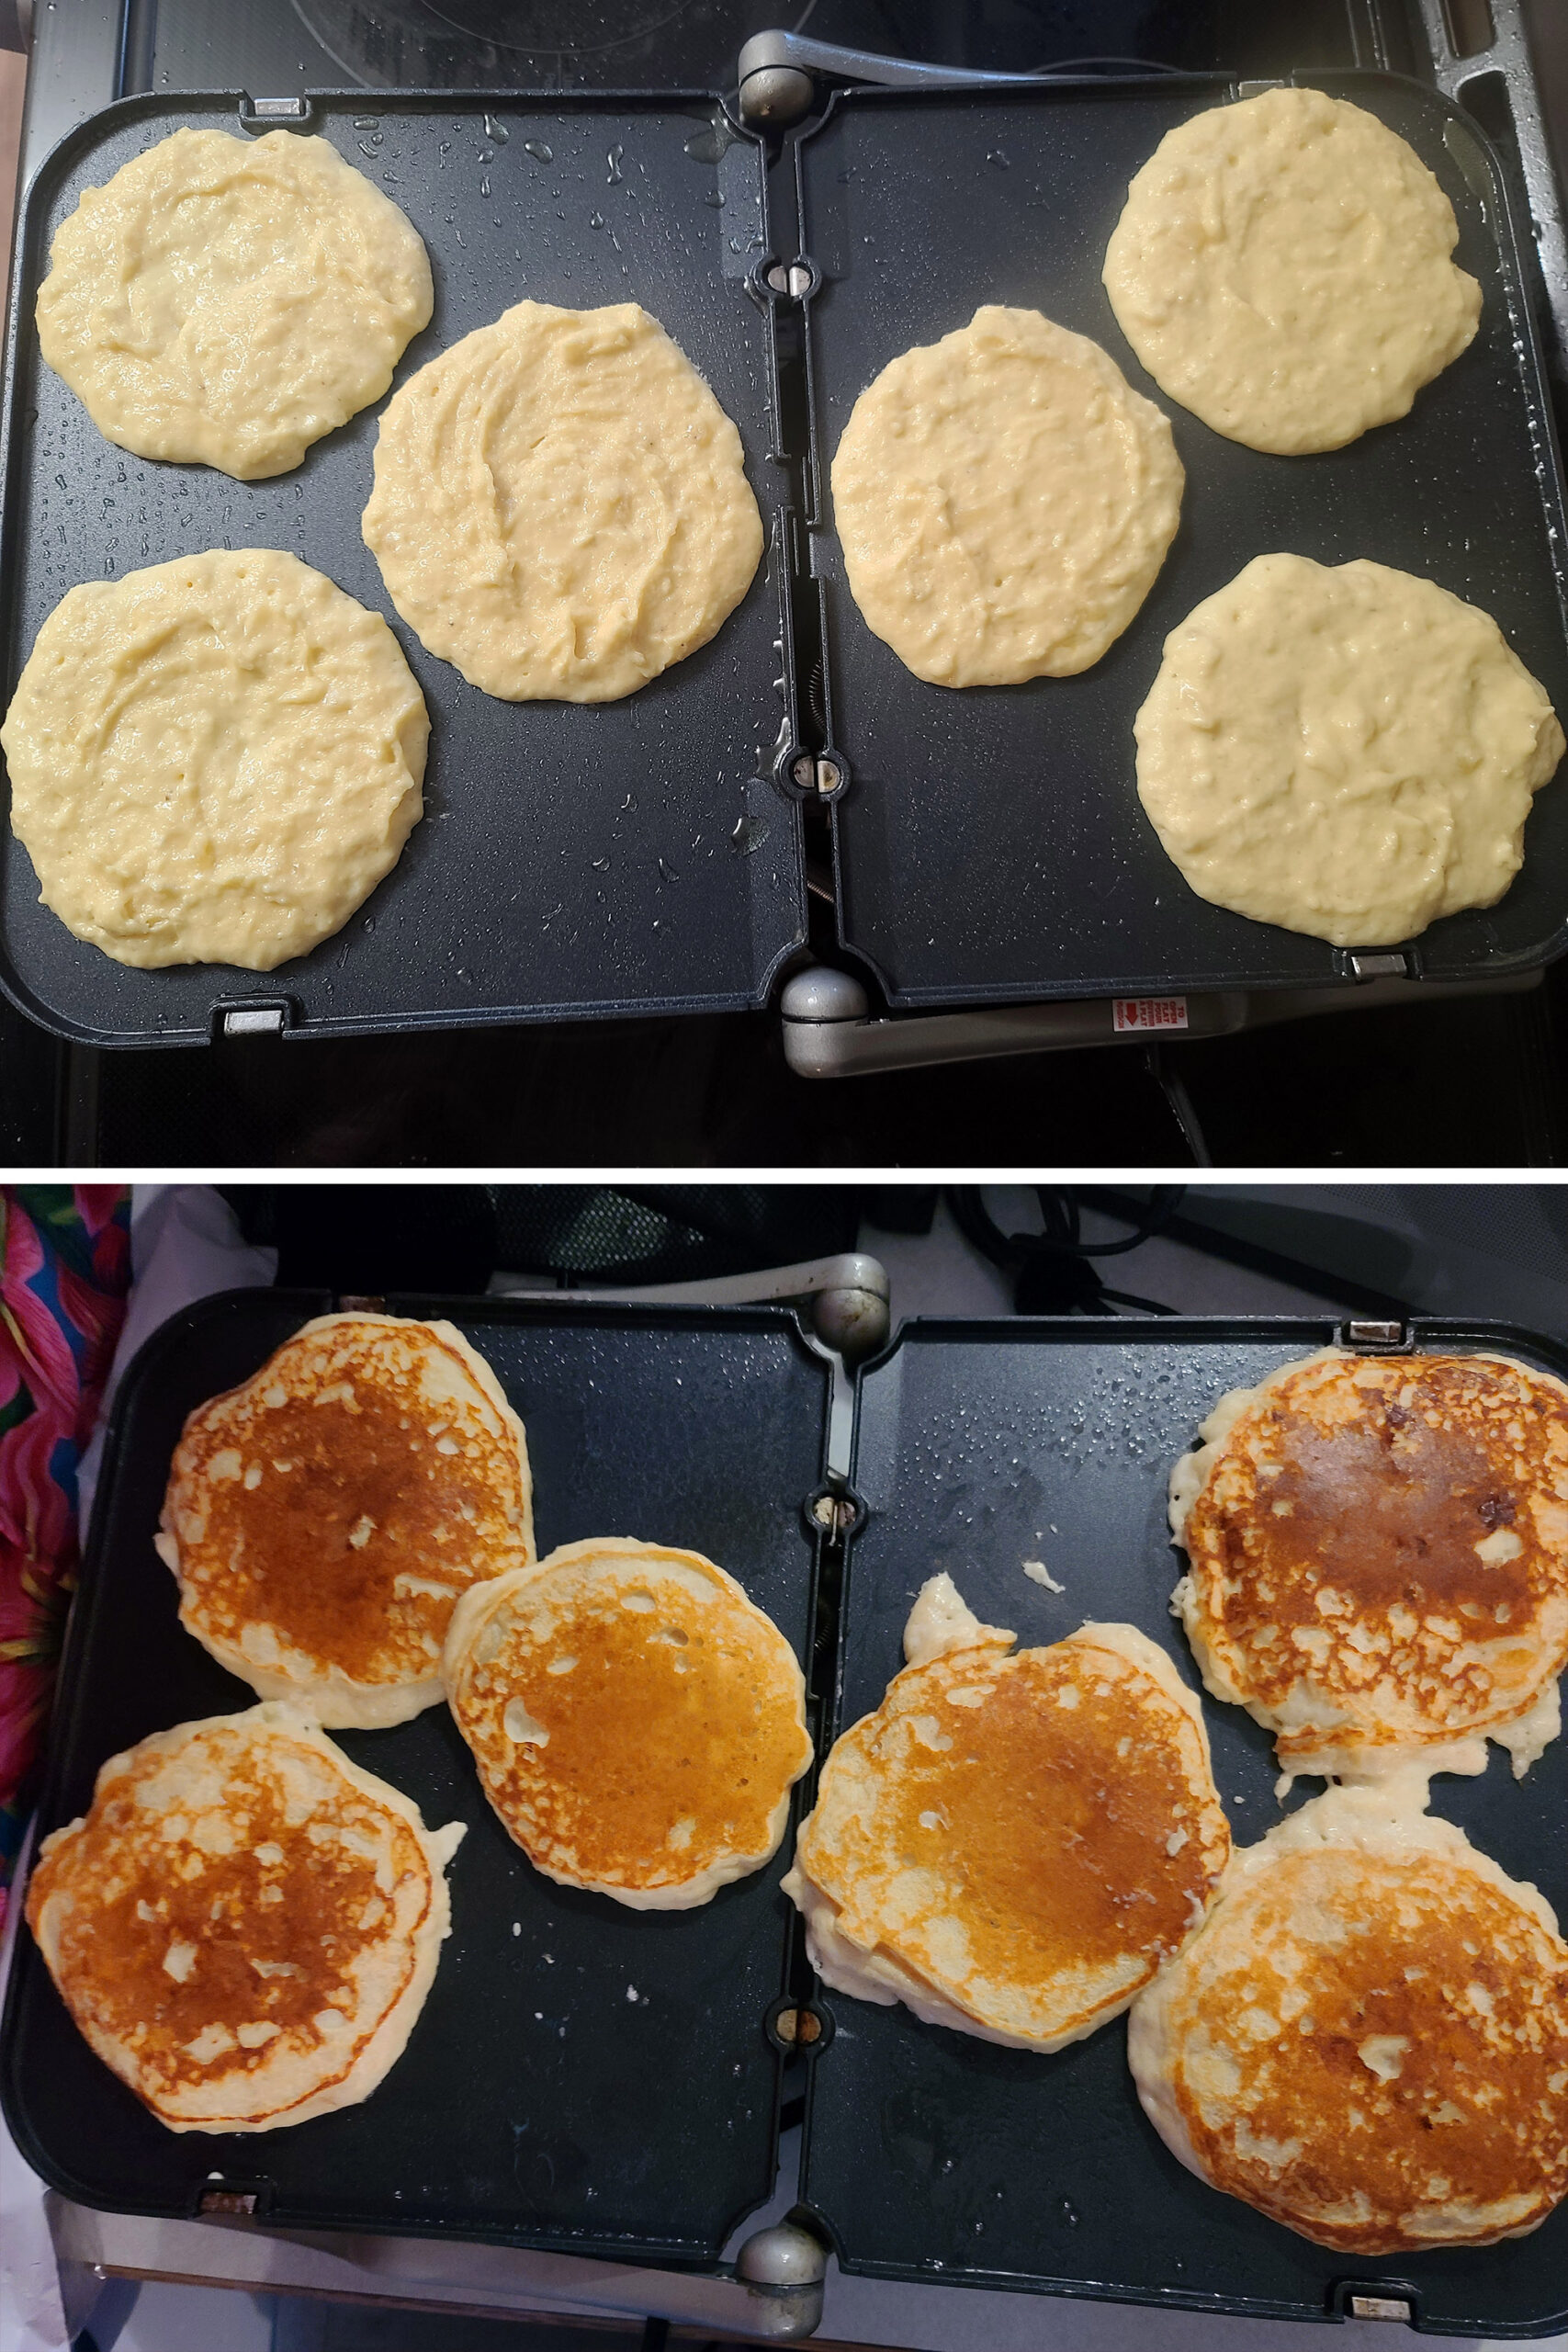 A 2 part image showing banana protein pancakes cooking on a griddle, before and after the first flip.